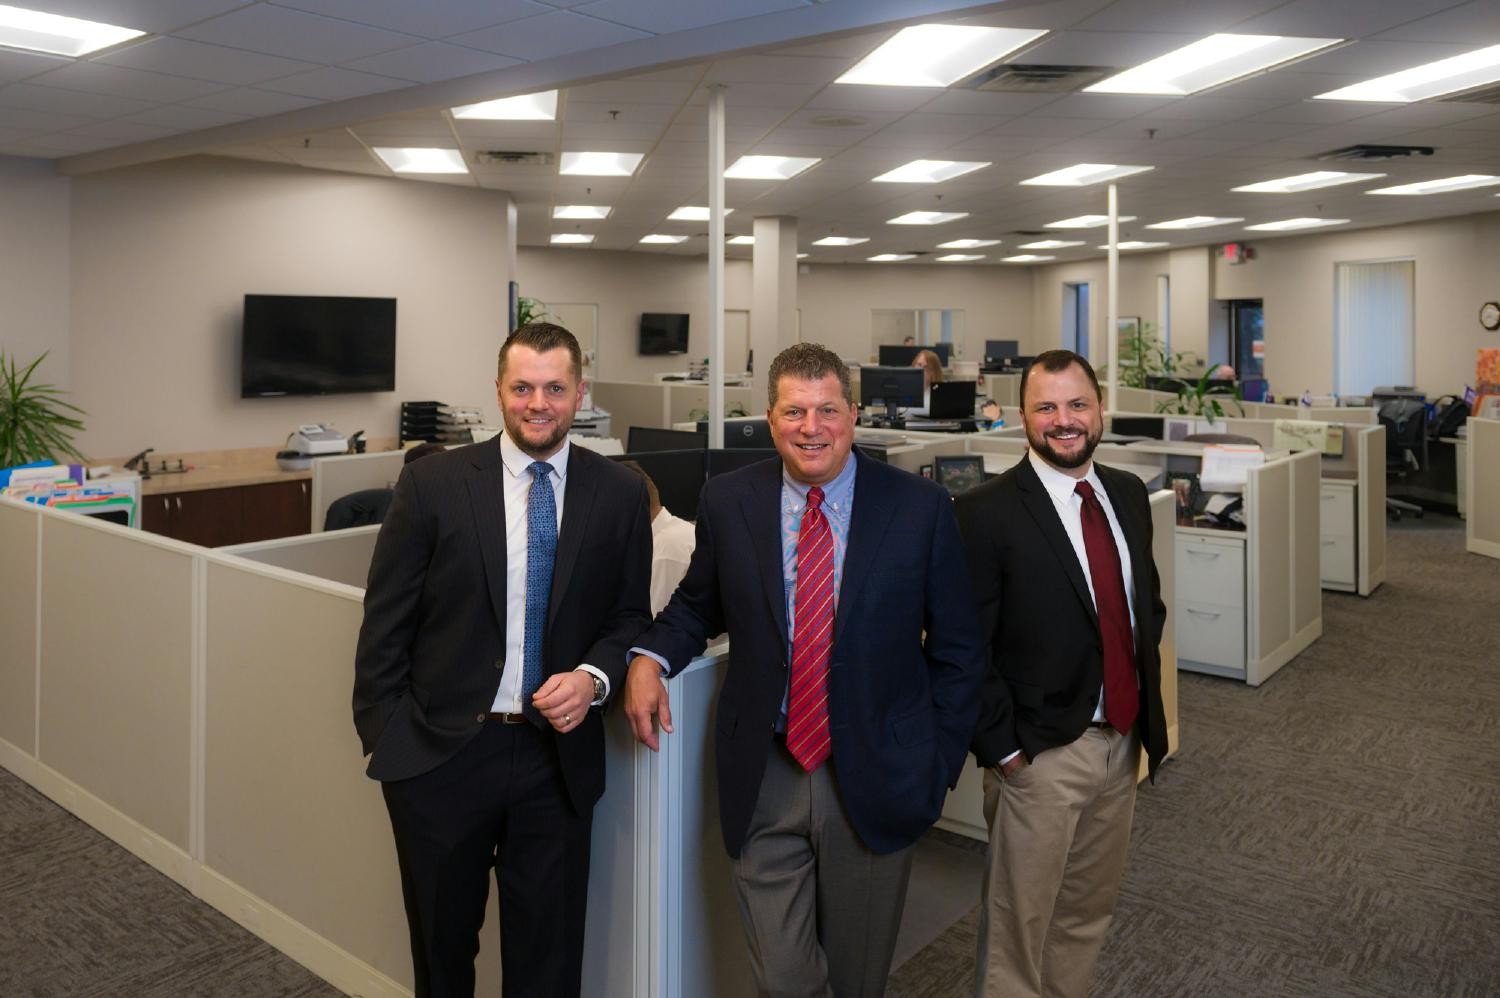 WPC Executive Team (l-to-r): President Brett Lurie, CEO Stuart Lurie, Head of Data Analytics and Information Josh Lurie